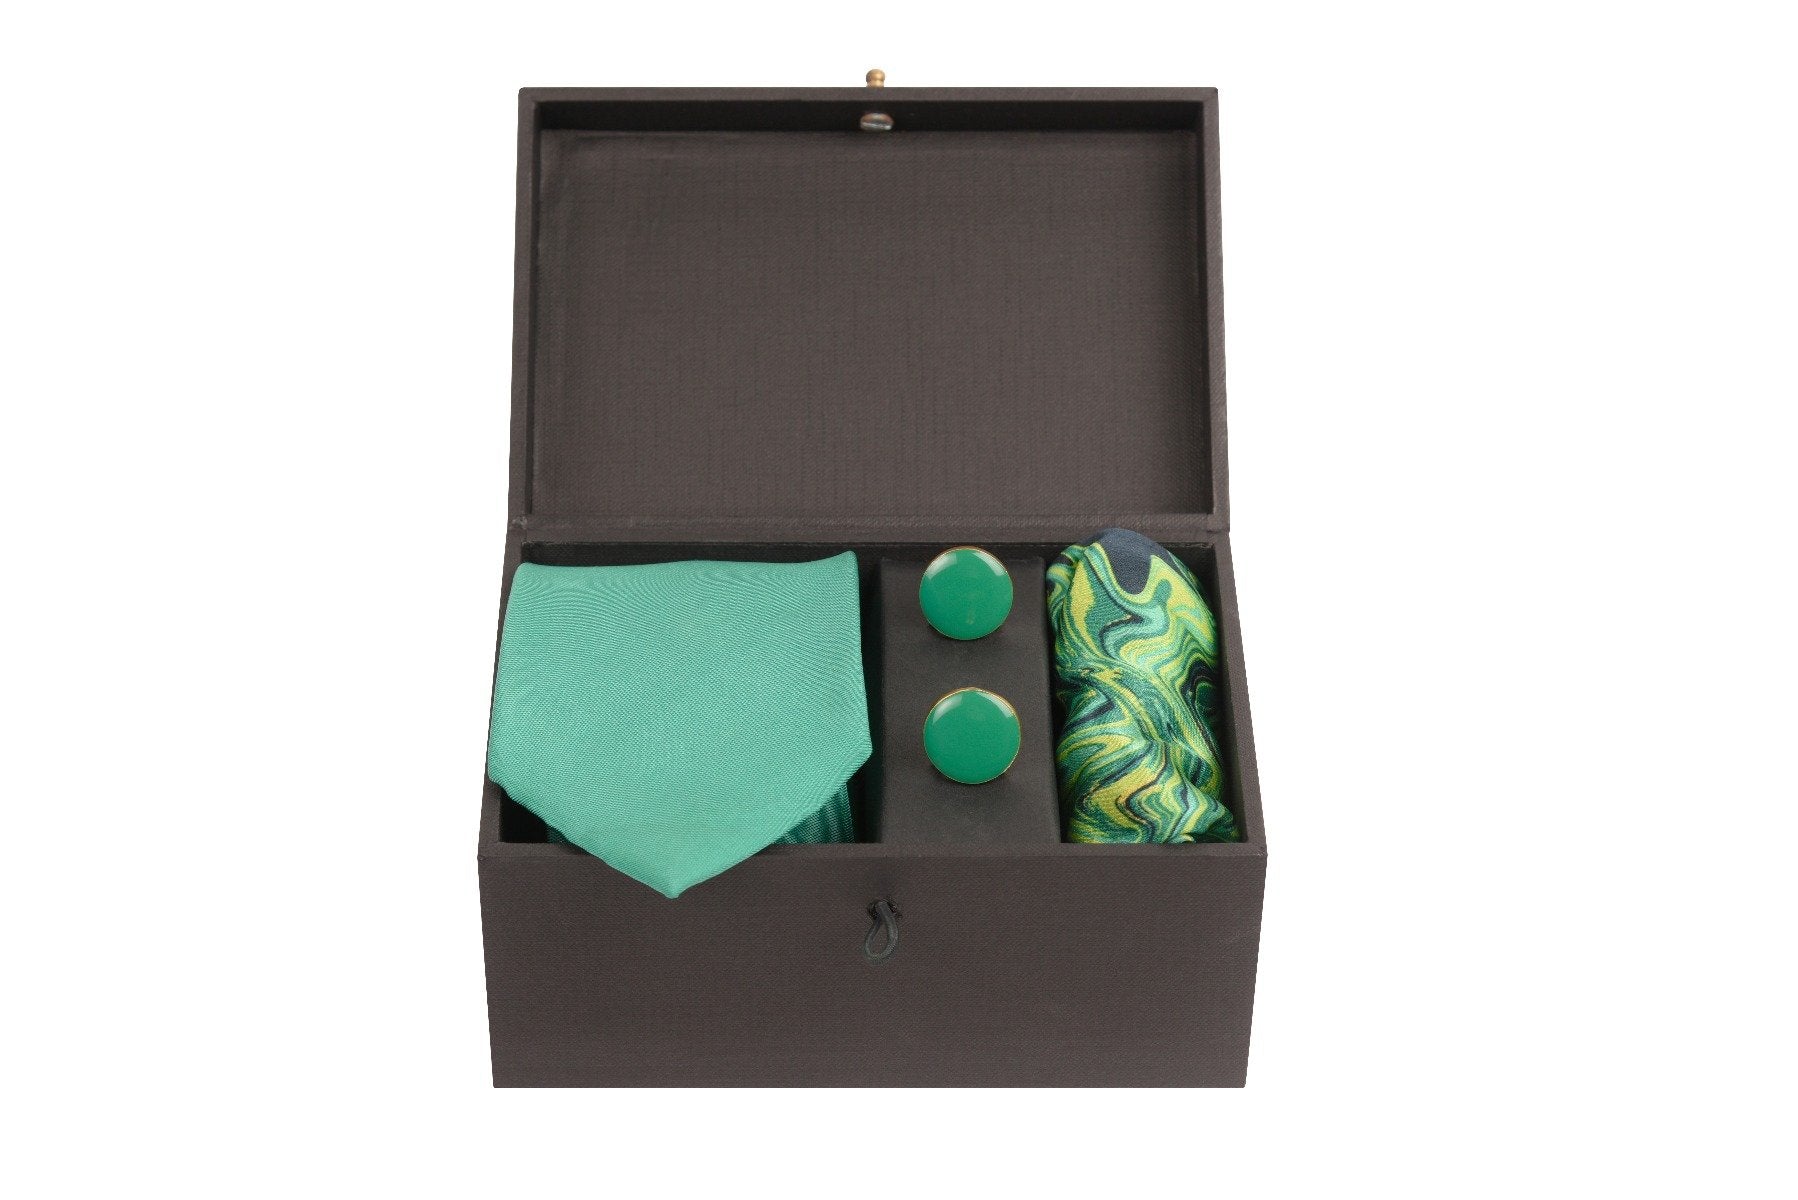 Chokore Green color 3-in-1 Gift set